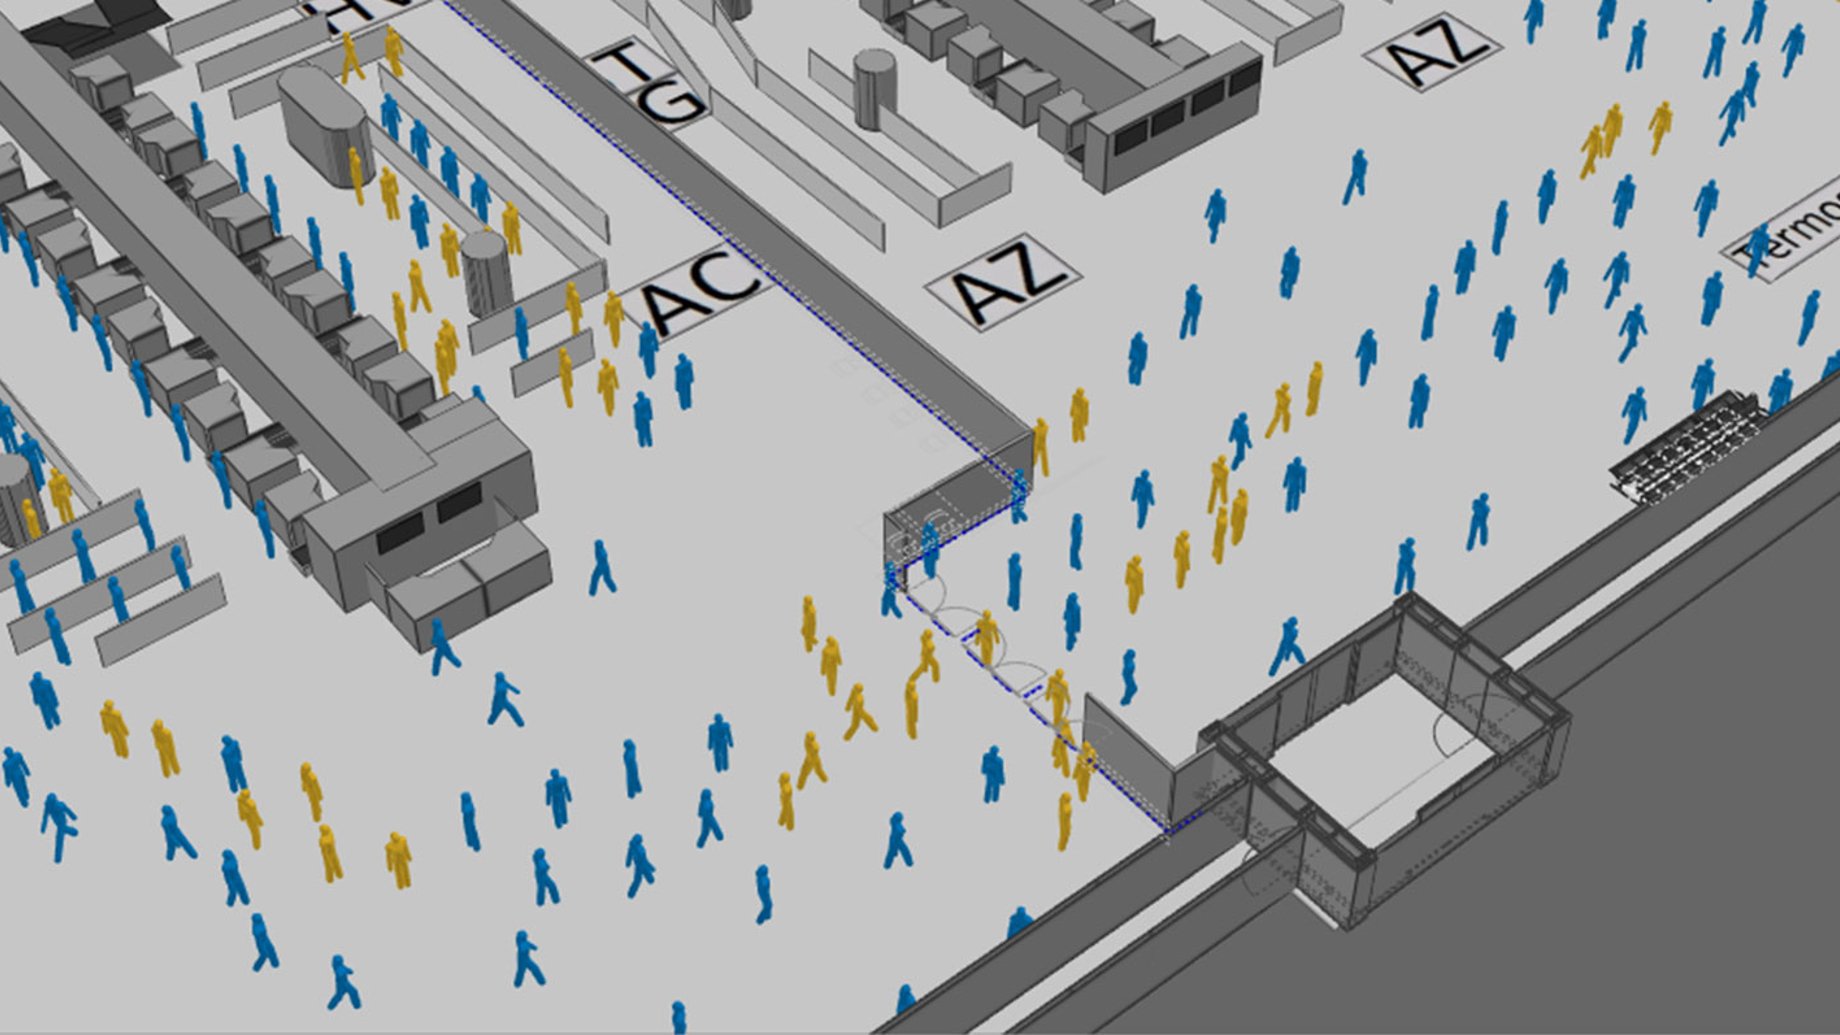 Massmotion still showing people moving around the airport